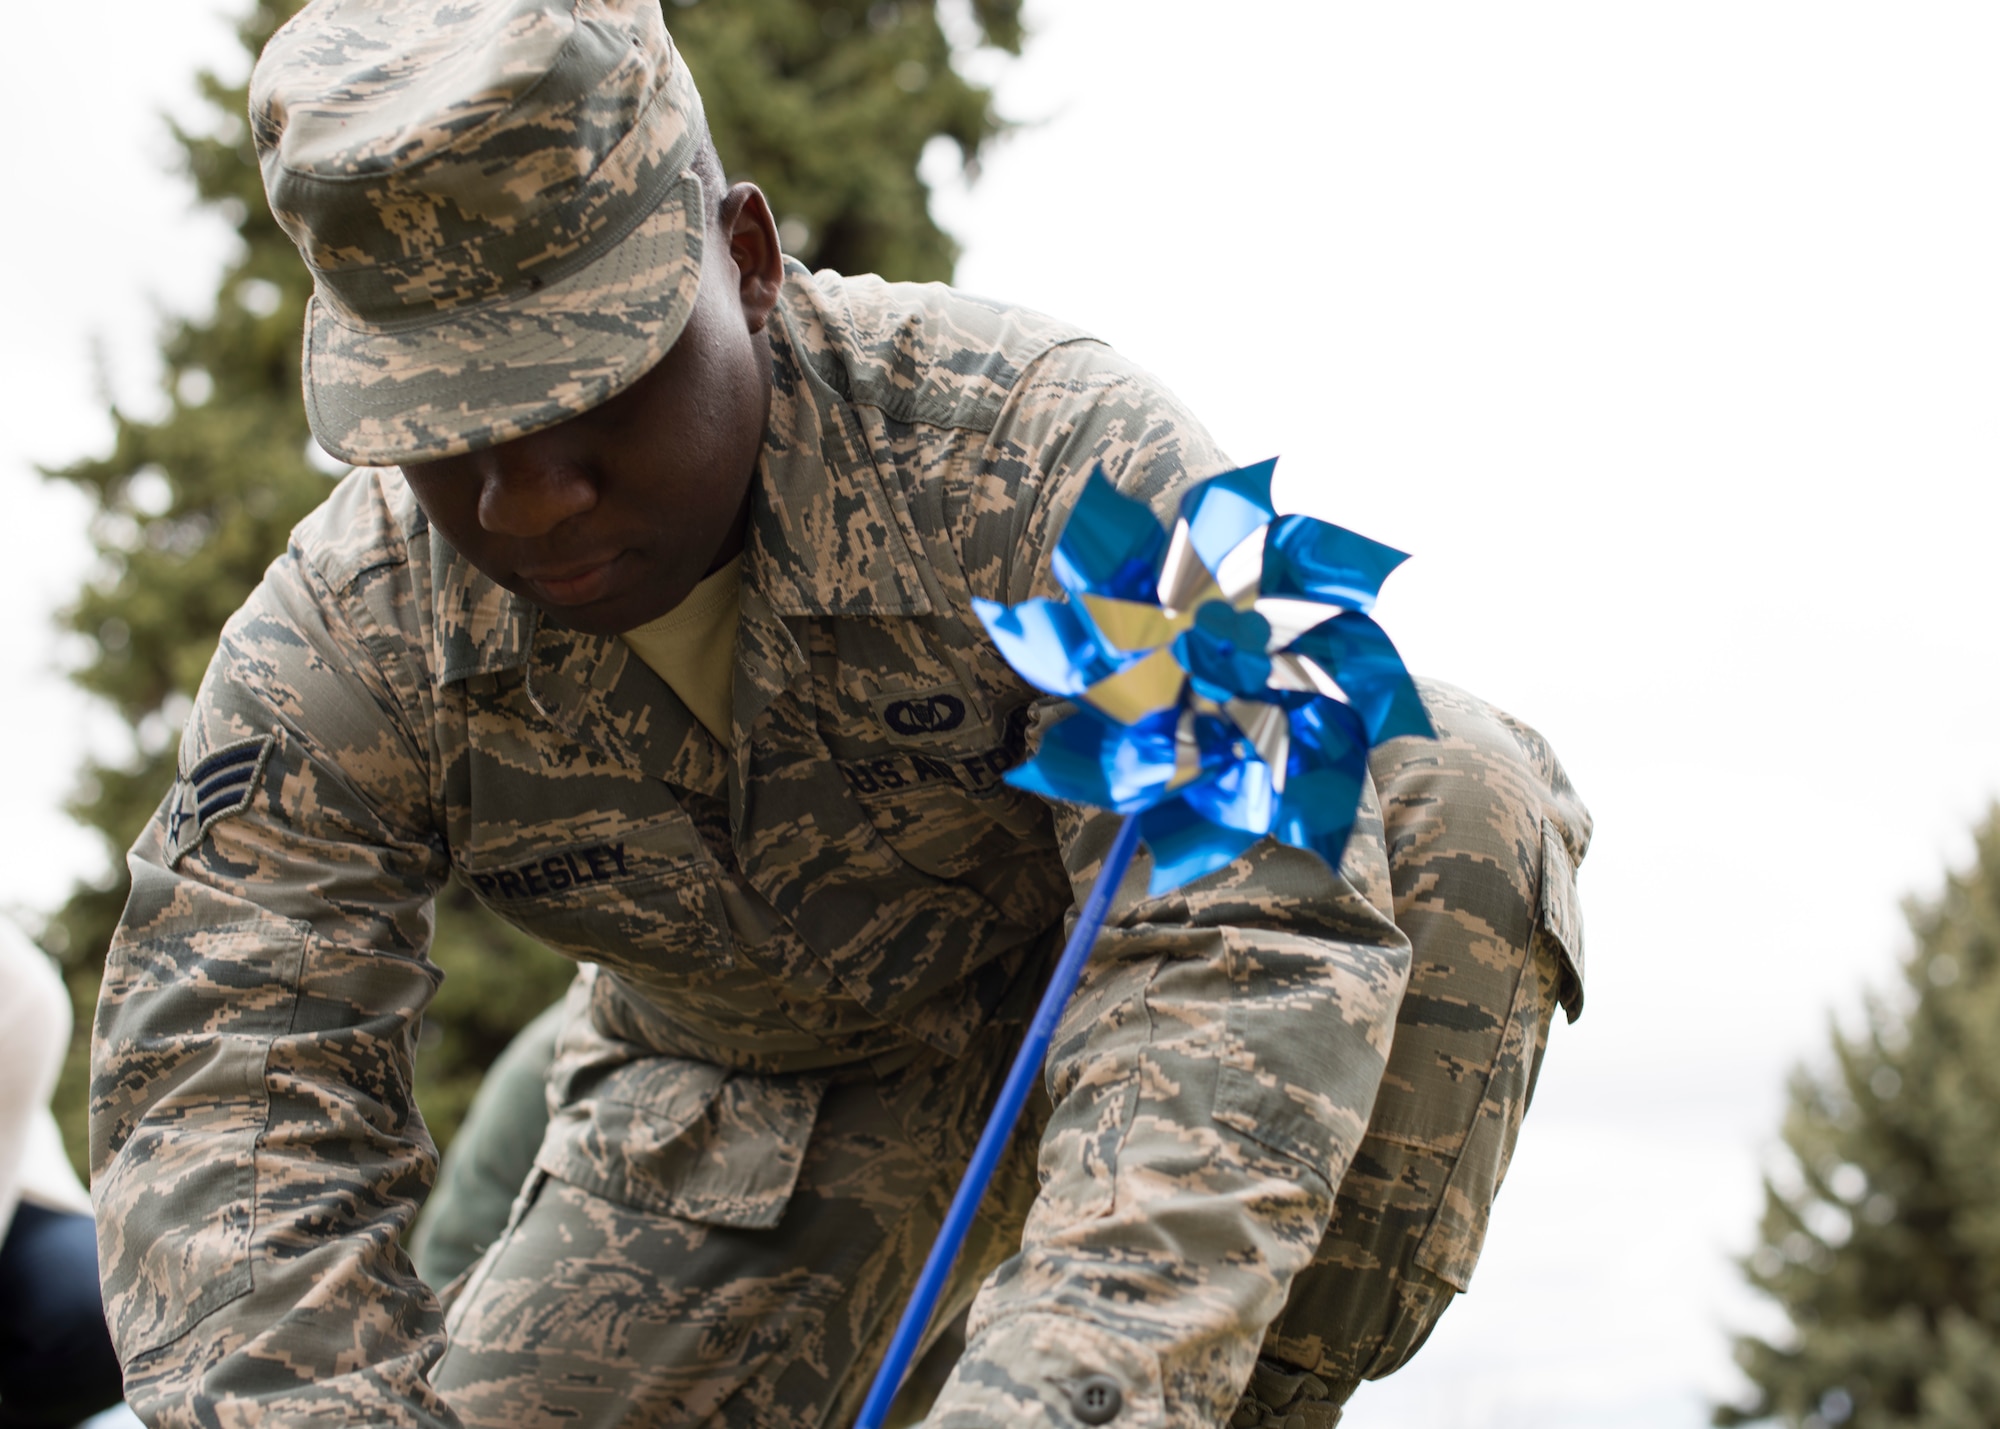 Senior Airman Davante Presley, 92nd Operation Support Squadron aviation resource manager, pins a pinwheel to the chapel lawn during a pinwheel ceremony in honor of Child Abuse Awareness Month at Fairchild Air Force Base, Washington, April 9, 2018. Research indicates children need a loving and supportive environment for a healthy childhood, a better chance of academic and financial success. (U.S. Air Force photo/Senior Airman Ryan Lackey)